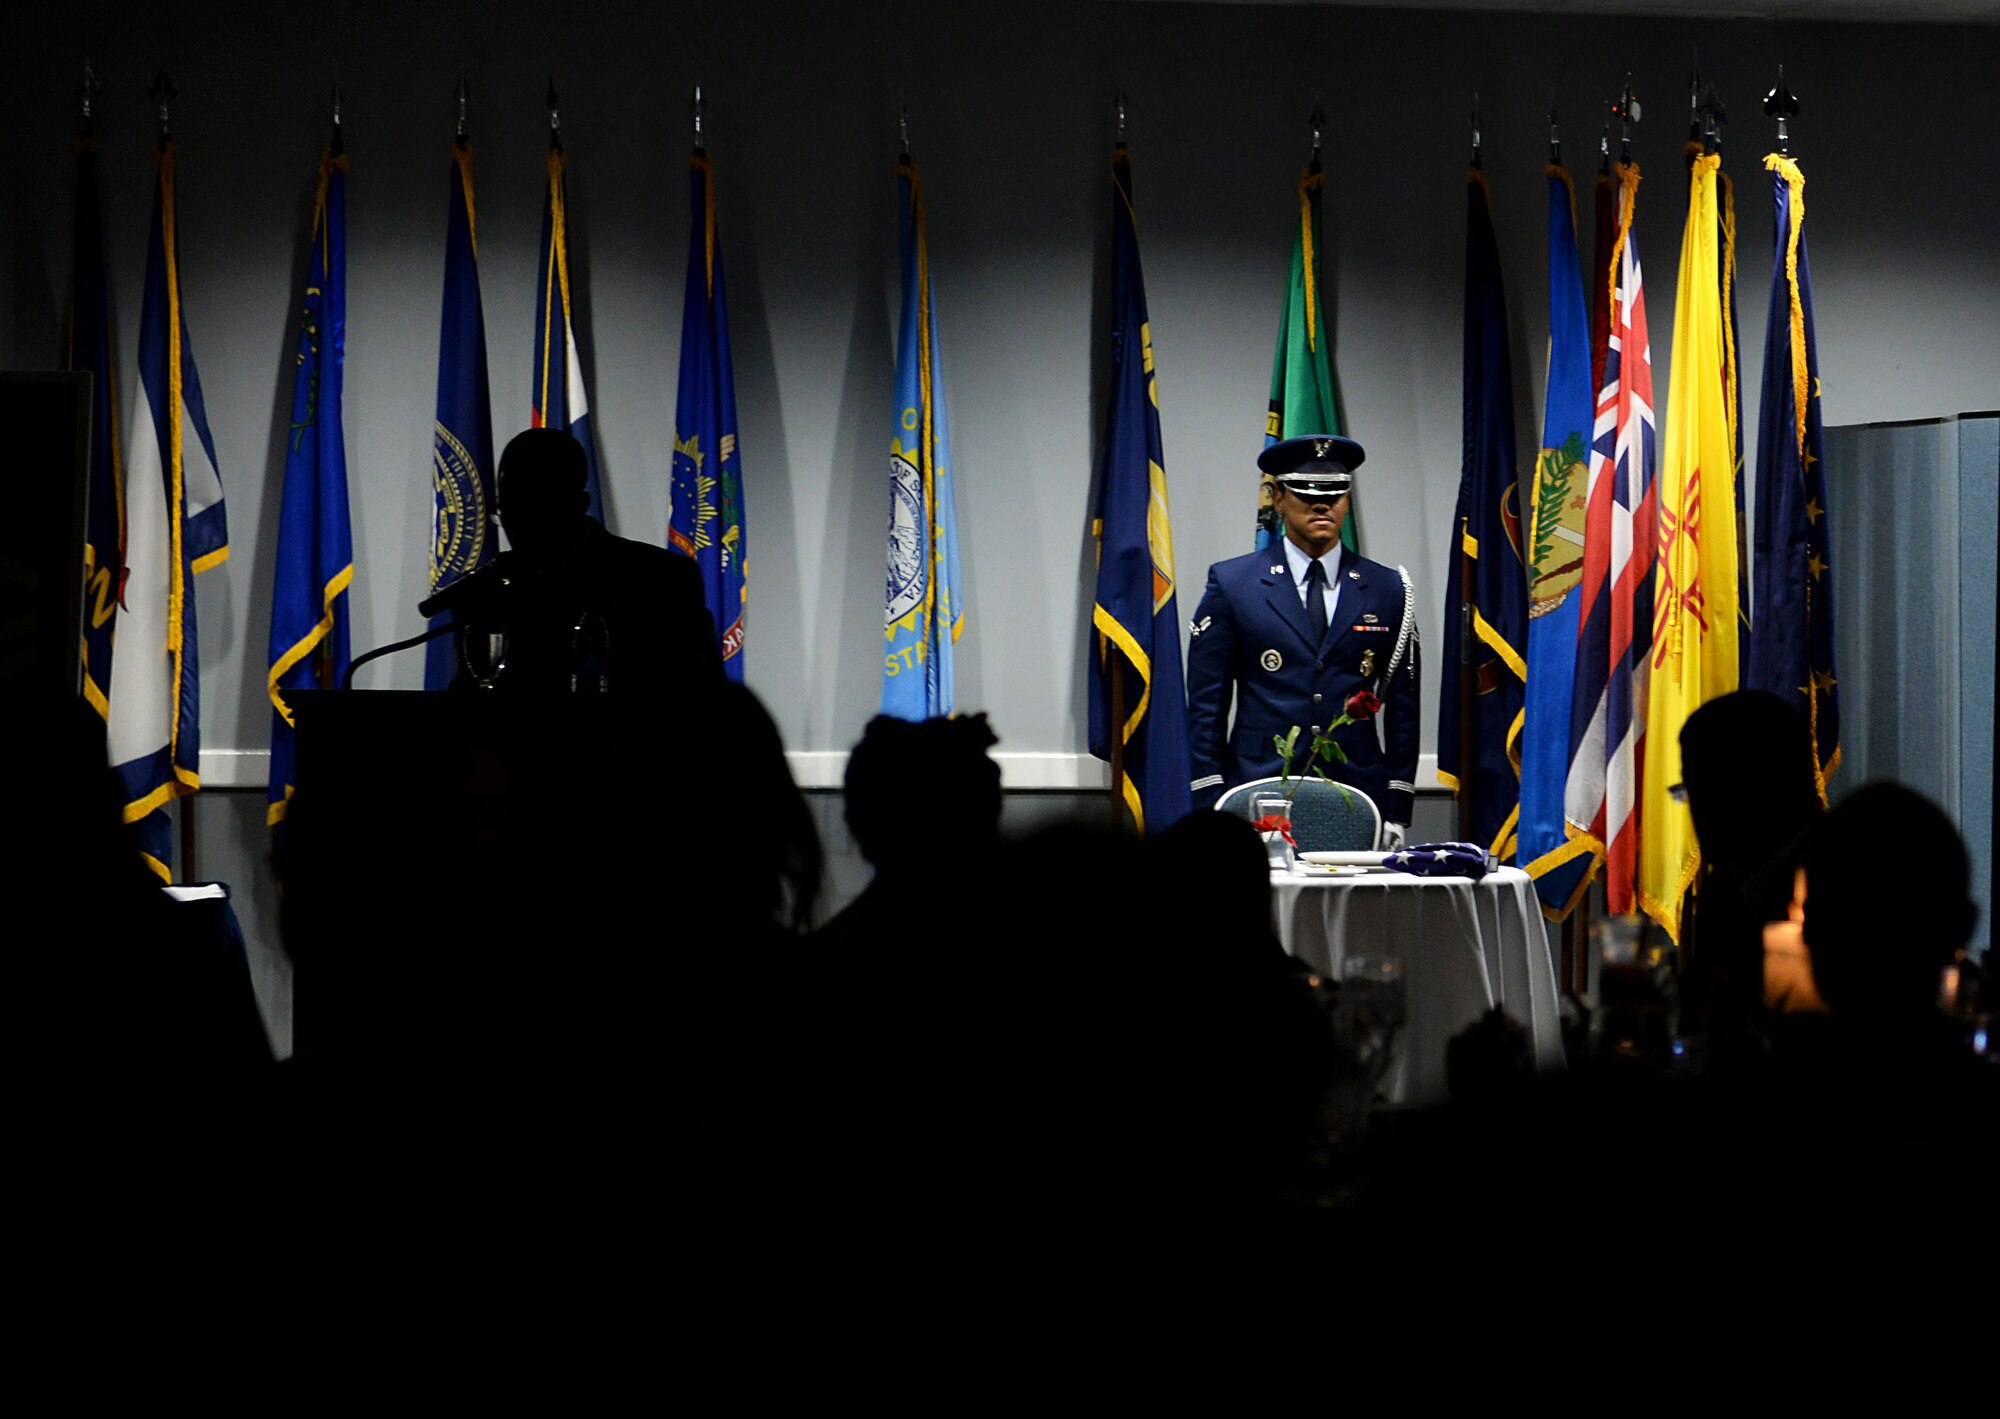 A Columbus Air Force Base Honor Guardsman stands before the POW/MIA table during a presentation at the Senior NCO Induction Ceremony Sept. 9, 2019, at the Club on Columbus AFB, Miss. The table is set in honor and remembrance of those who have fallen or became prisoners of war in the line of action. (U.S. Air Force photo by Airman 1st Class Hannah Bean)